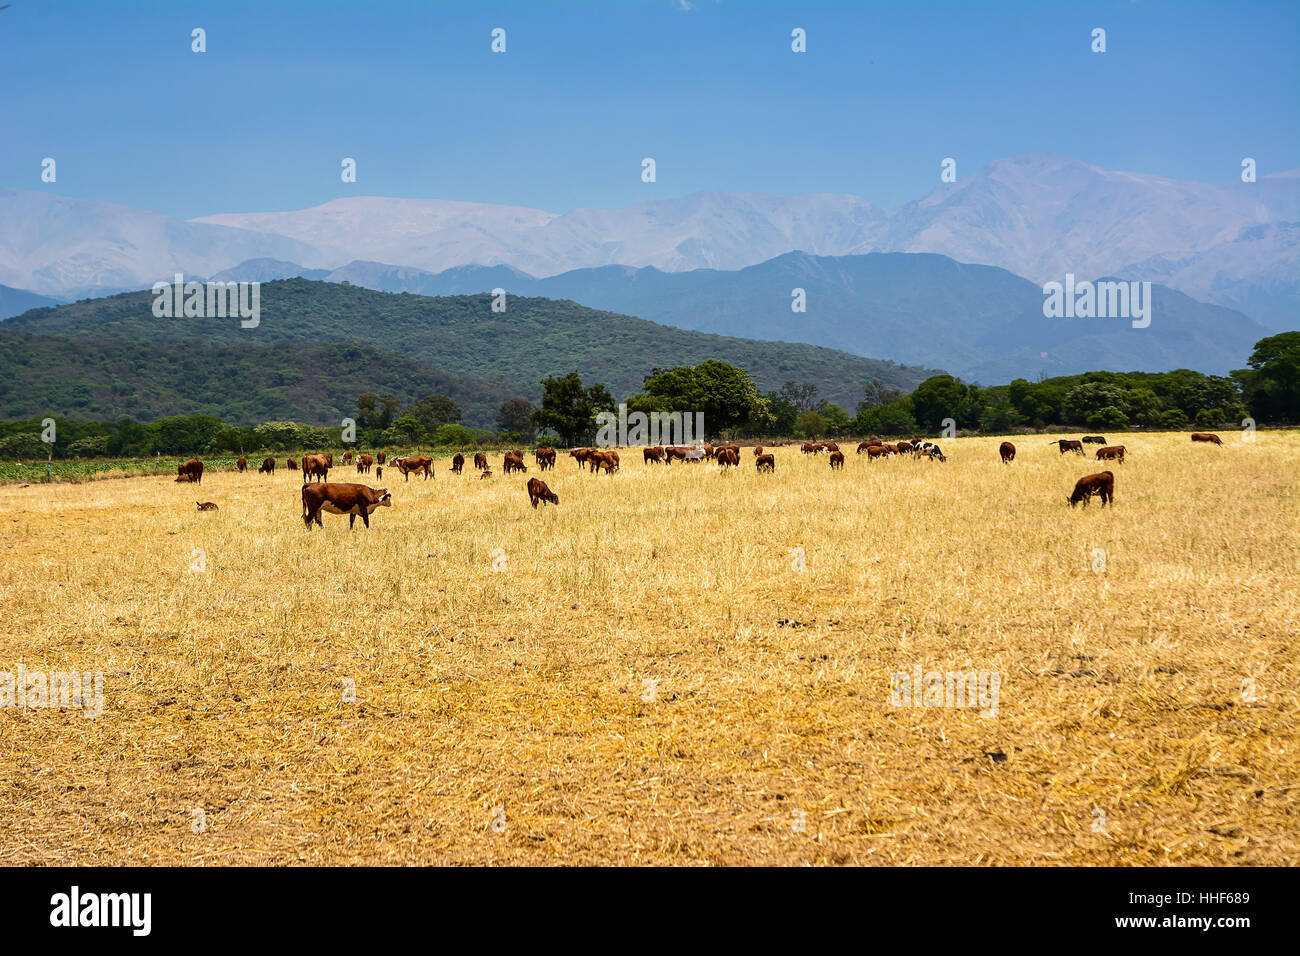 cattle ruminating in the field at the base of the Andes. Stock Photo